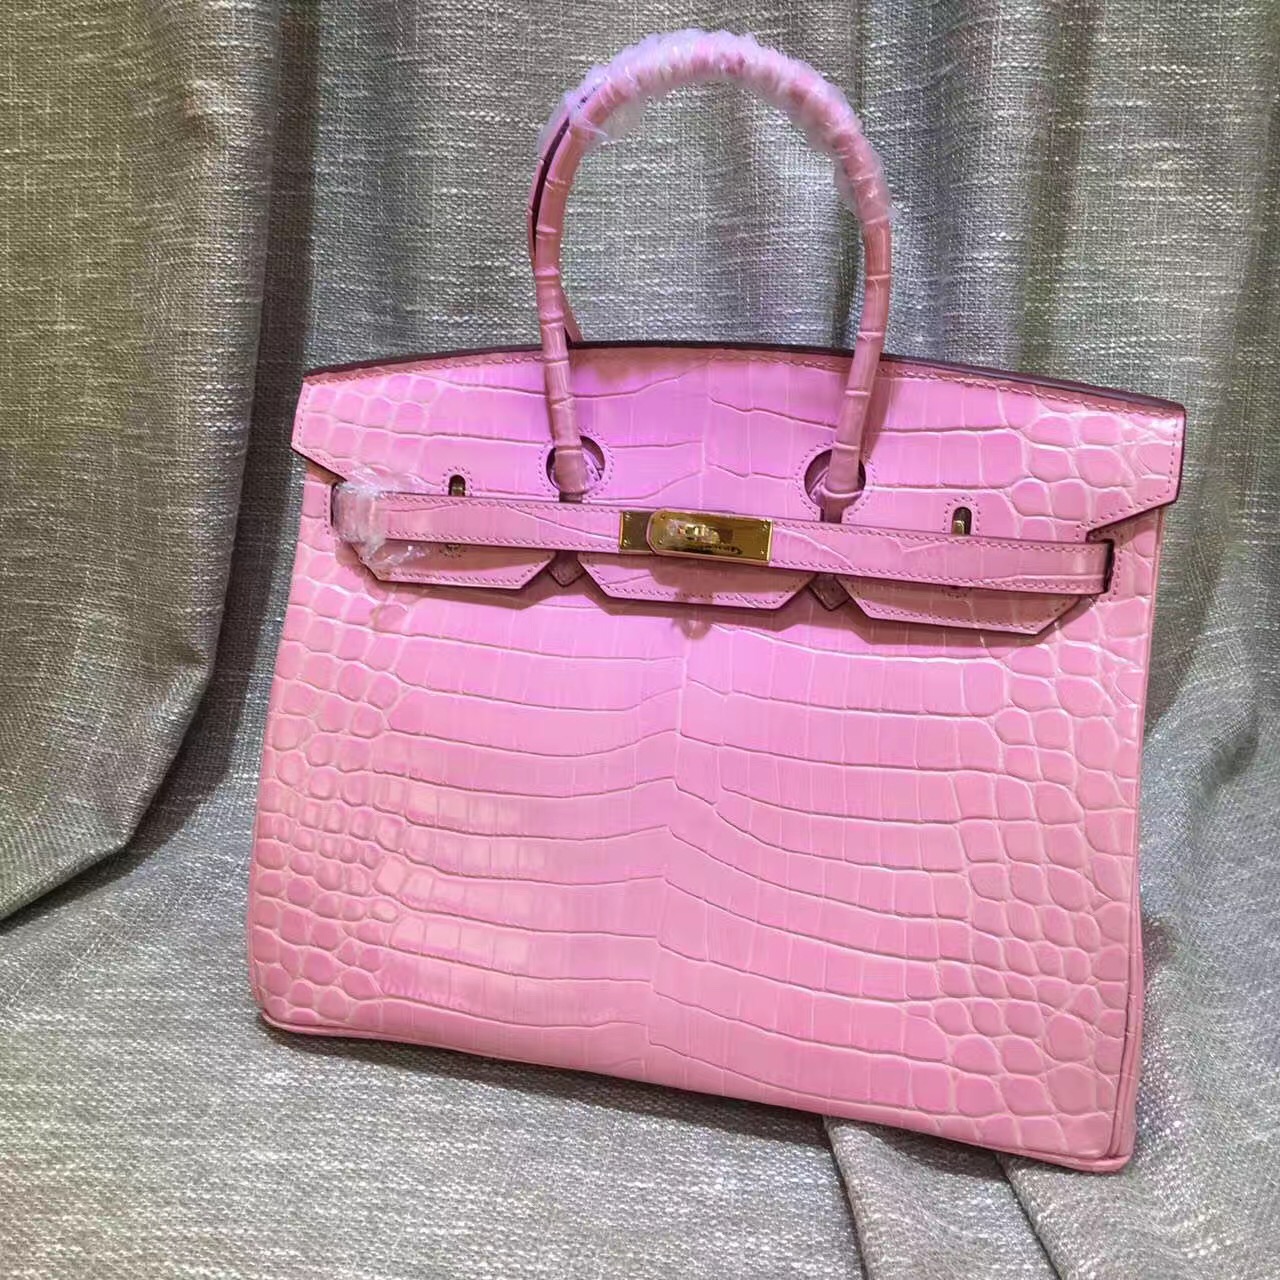 Pink Hermes crocodile-skin bag sells for $223,000 at Christie's auction –  New York Daily News